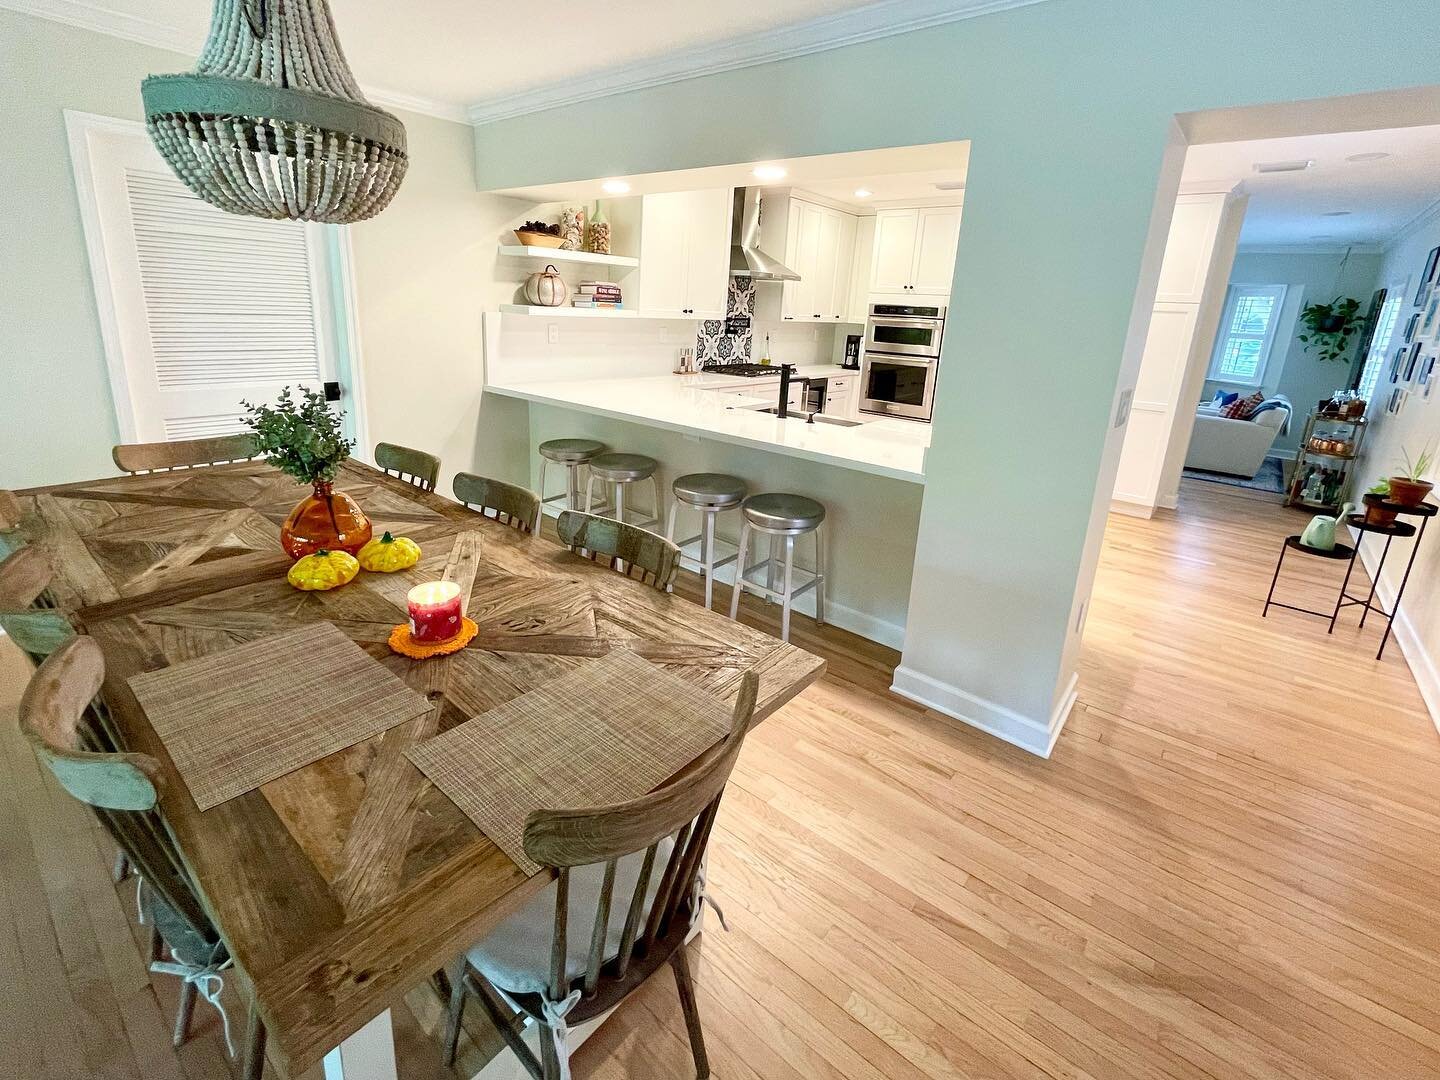 The perfect entertaining space! 🤩 

#DNAgeneralcontracting #QualityIsInOurDNA 
Design credit: @buck_reilly_architect 
. 
.
.
.
.
#KitchenRemodel #HomeImprovement #GeneralContractor #FortLauderdaleGeneralContractor #MiamiGeneralContractor #GeneralCon